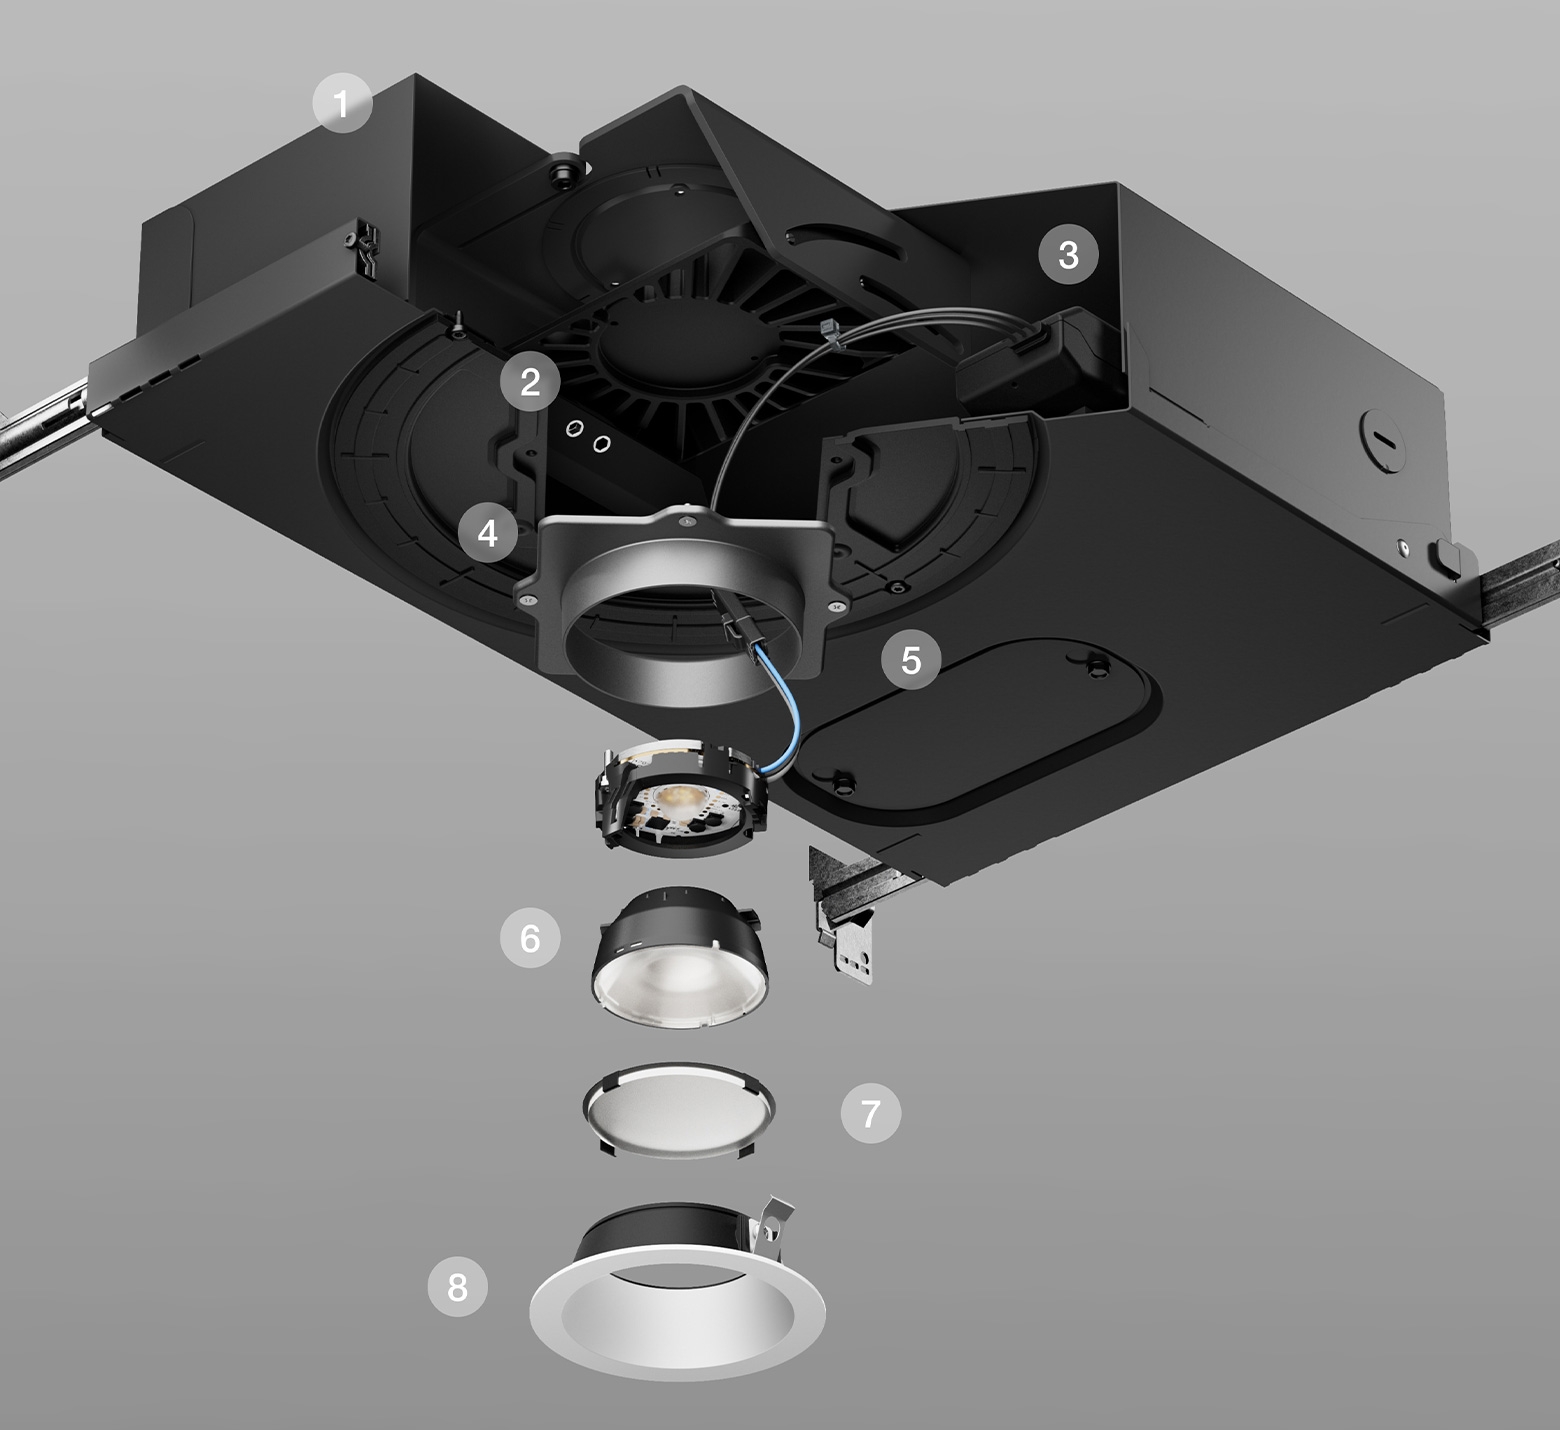 Anatomy of the Rania D2 LED Downlight with 2 inch or 3.5 inch housing